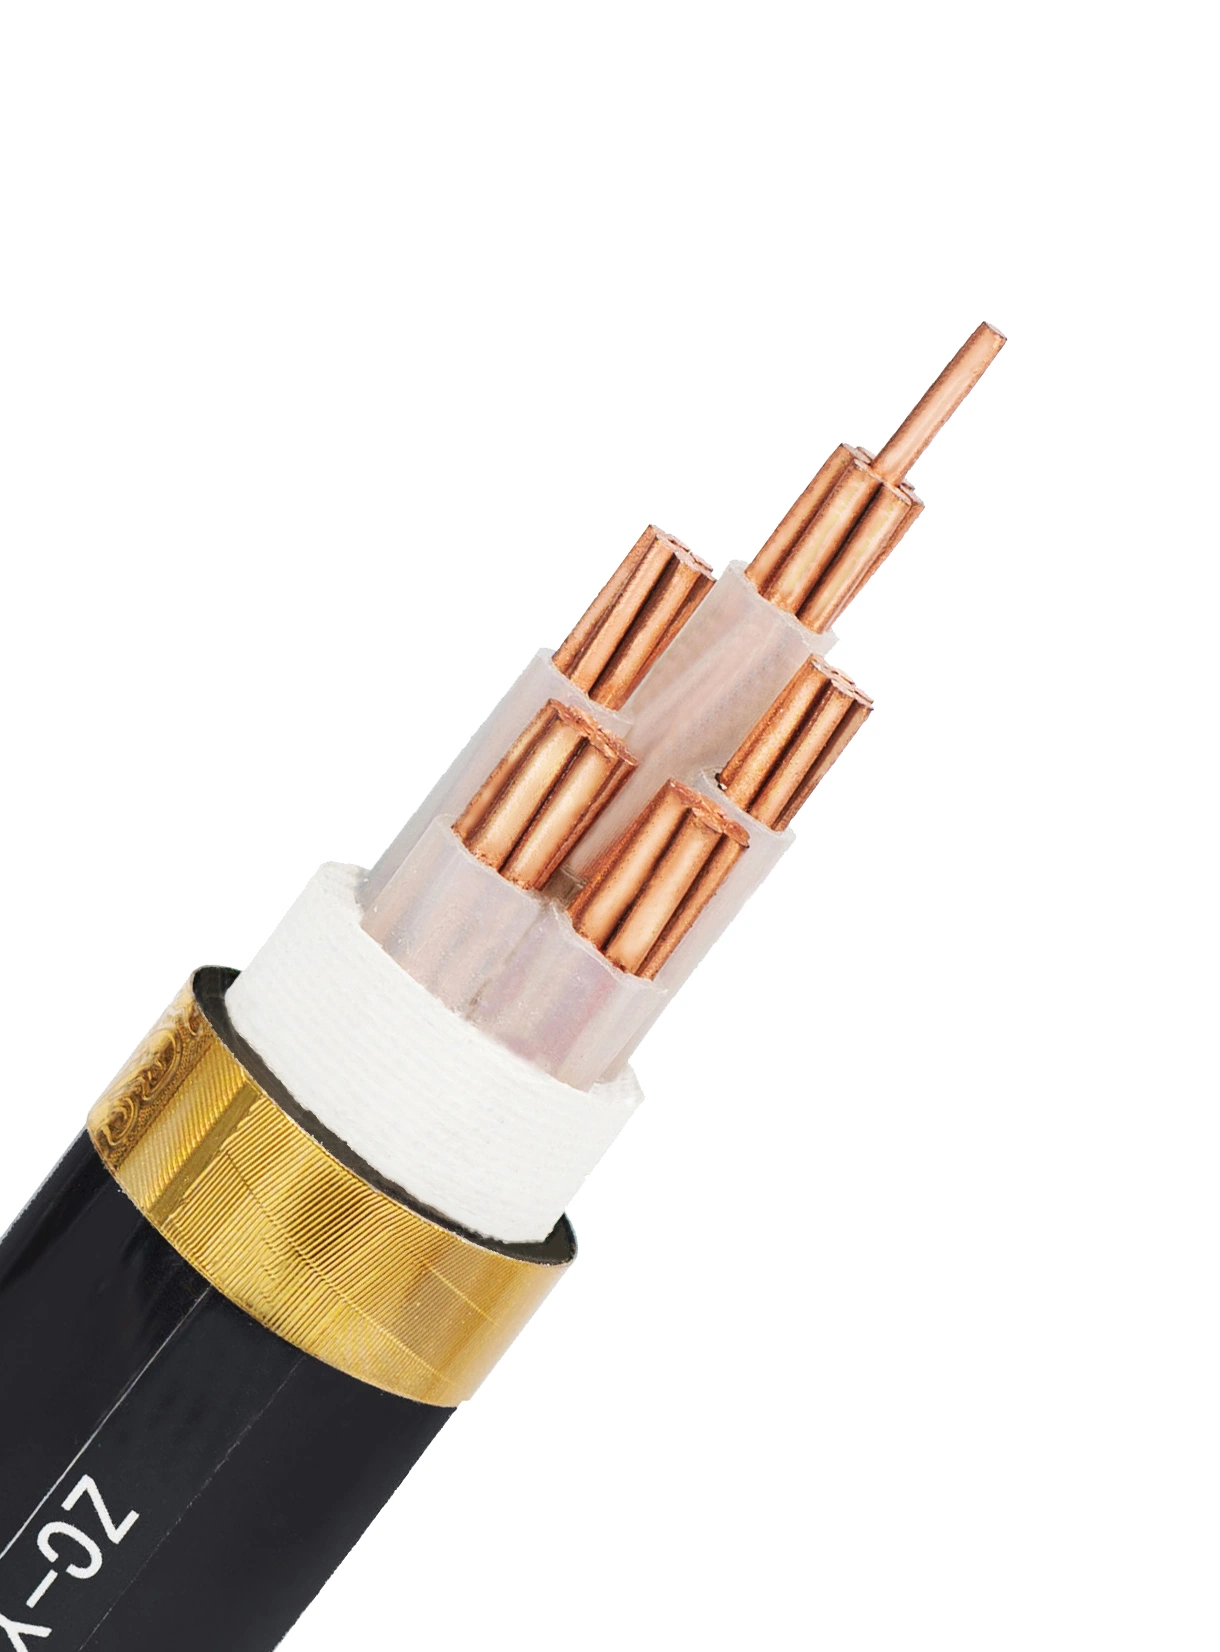 Aluminium Tinned Copper Clad Strand Steel Wire CCS Insulated 600V Lighting Insulated Cable